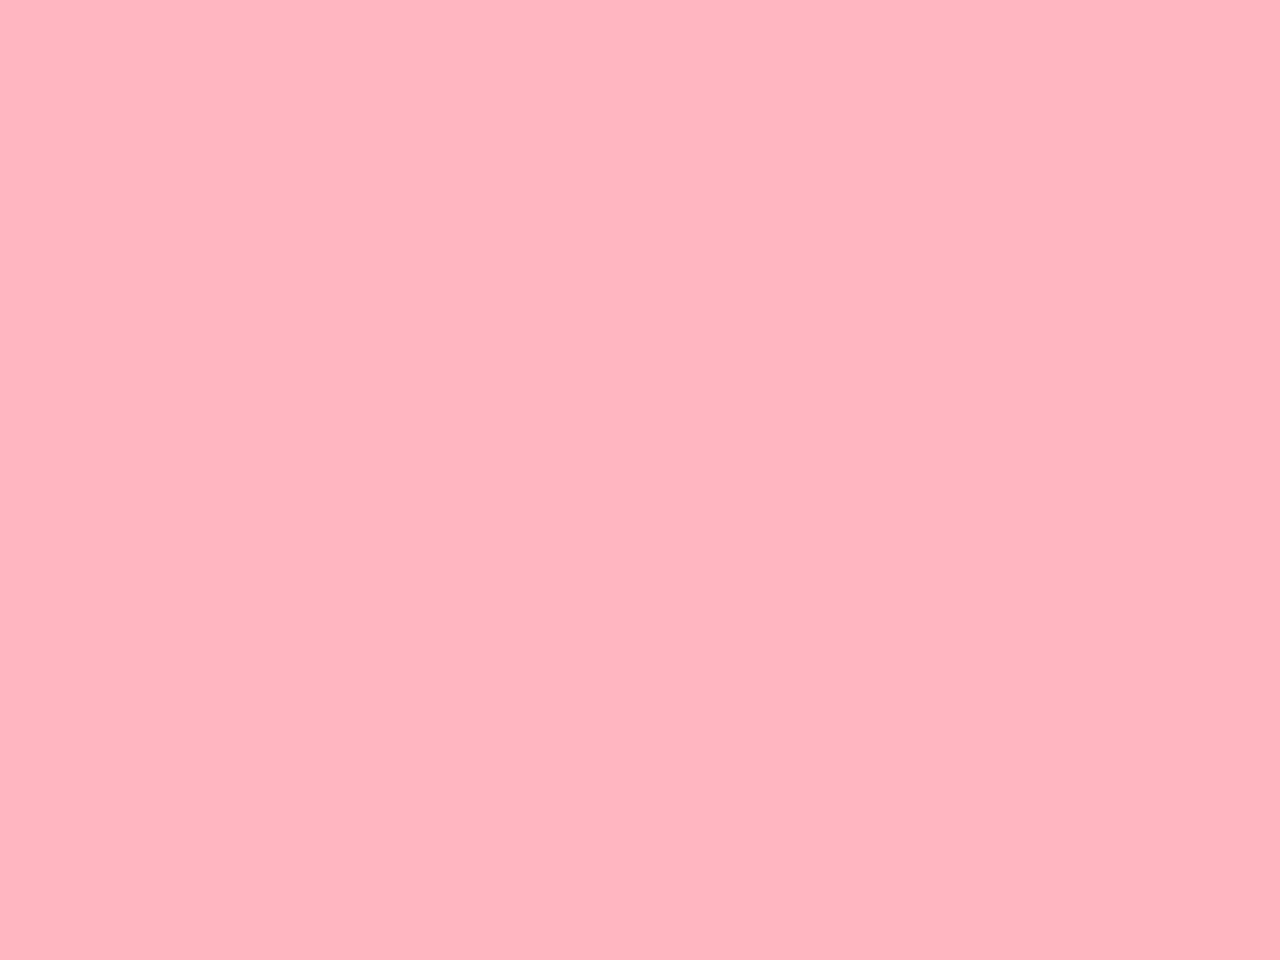 Free 1280x960 resolution Light Pink solid color background view and 1280x960